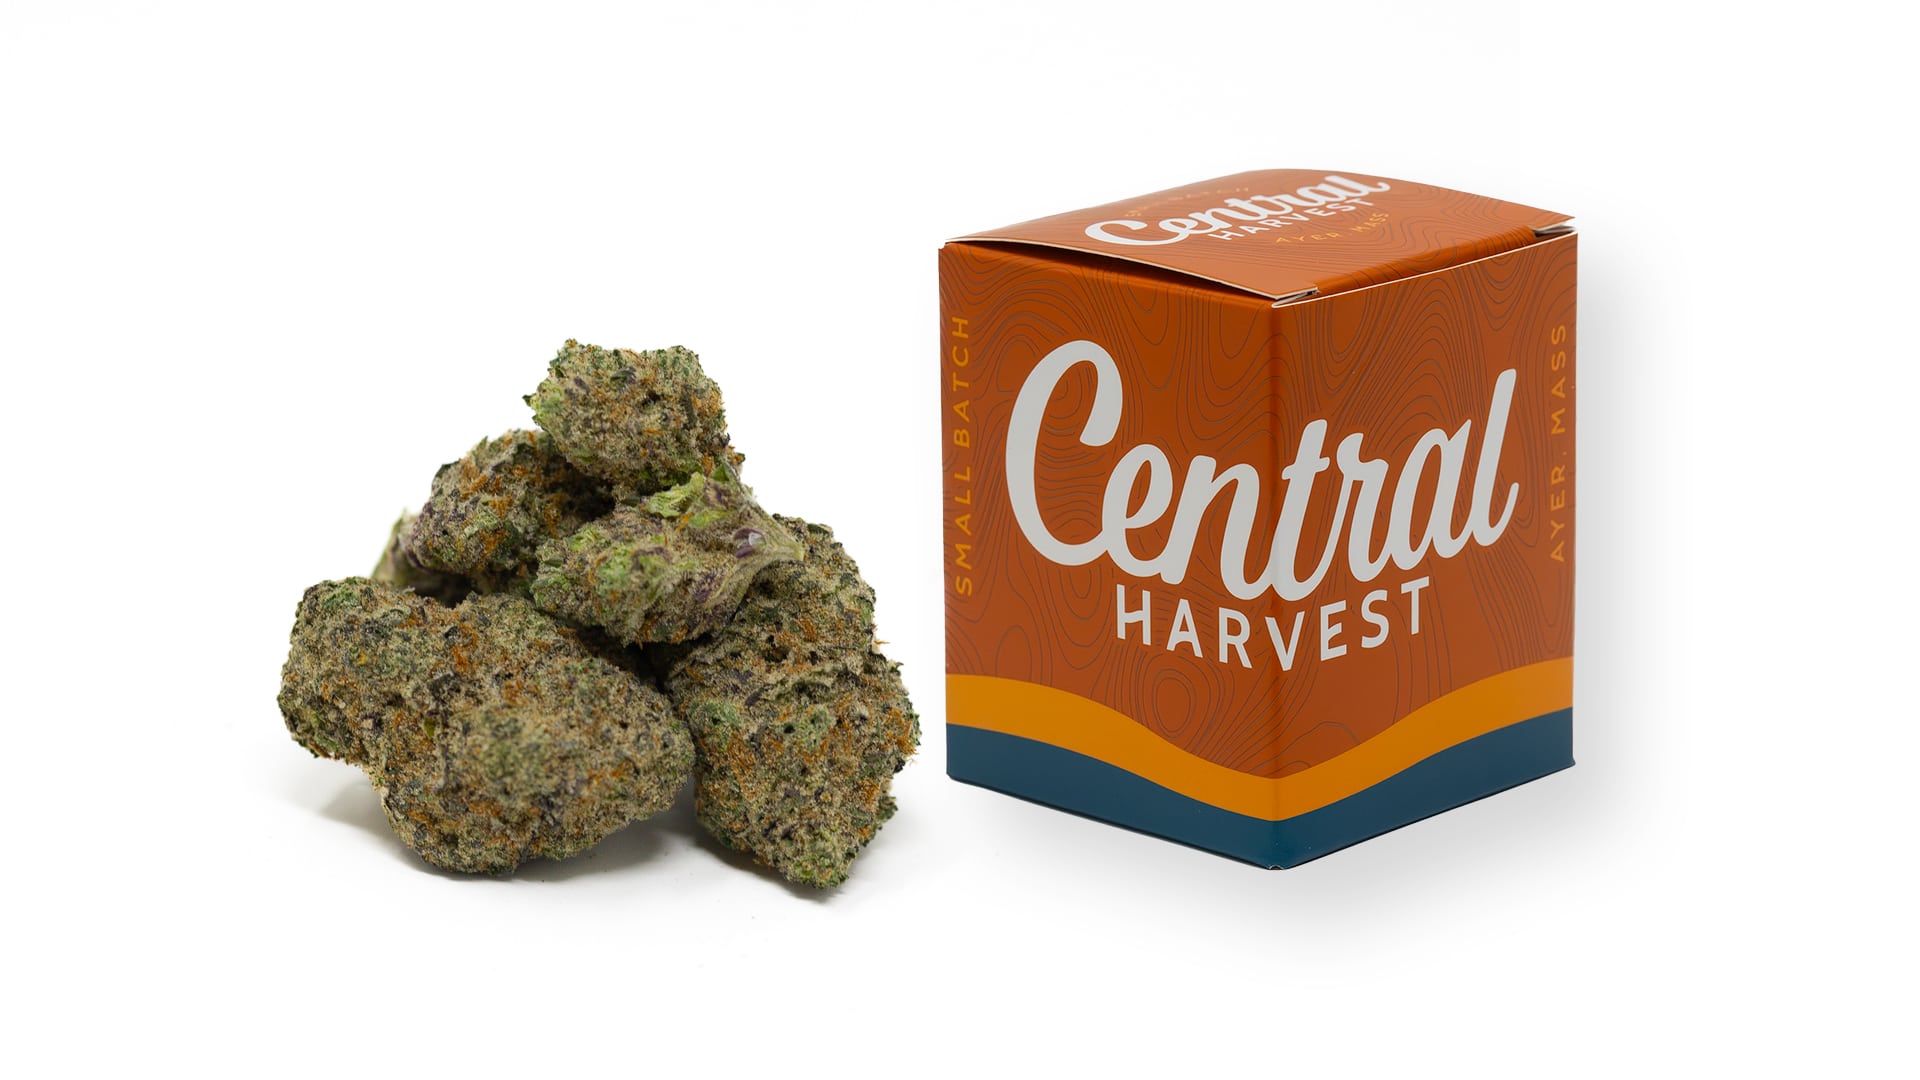 Mont Blanc is a Sativa Cannabis Strain grown and packaged at Central Harvest